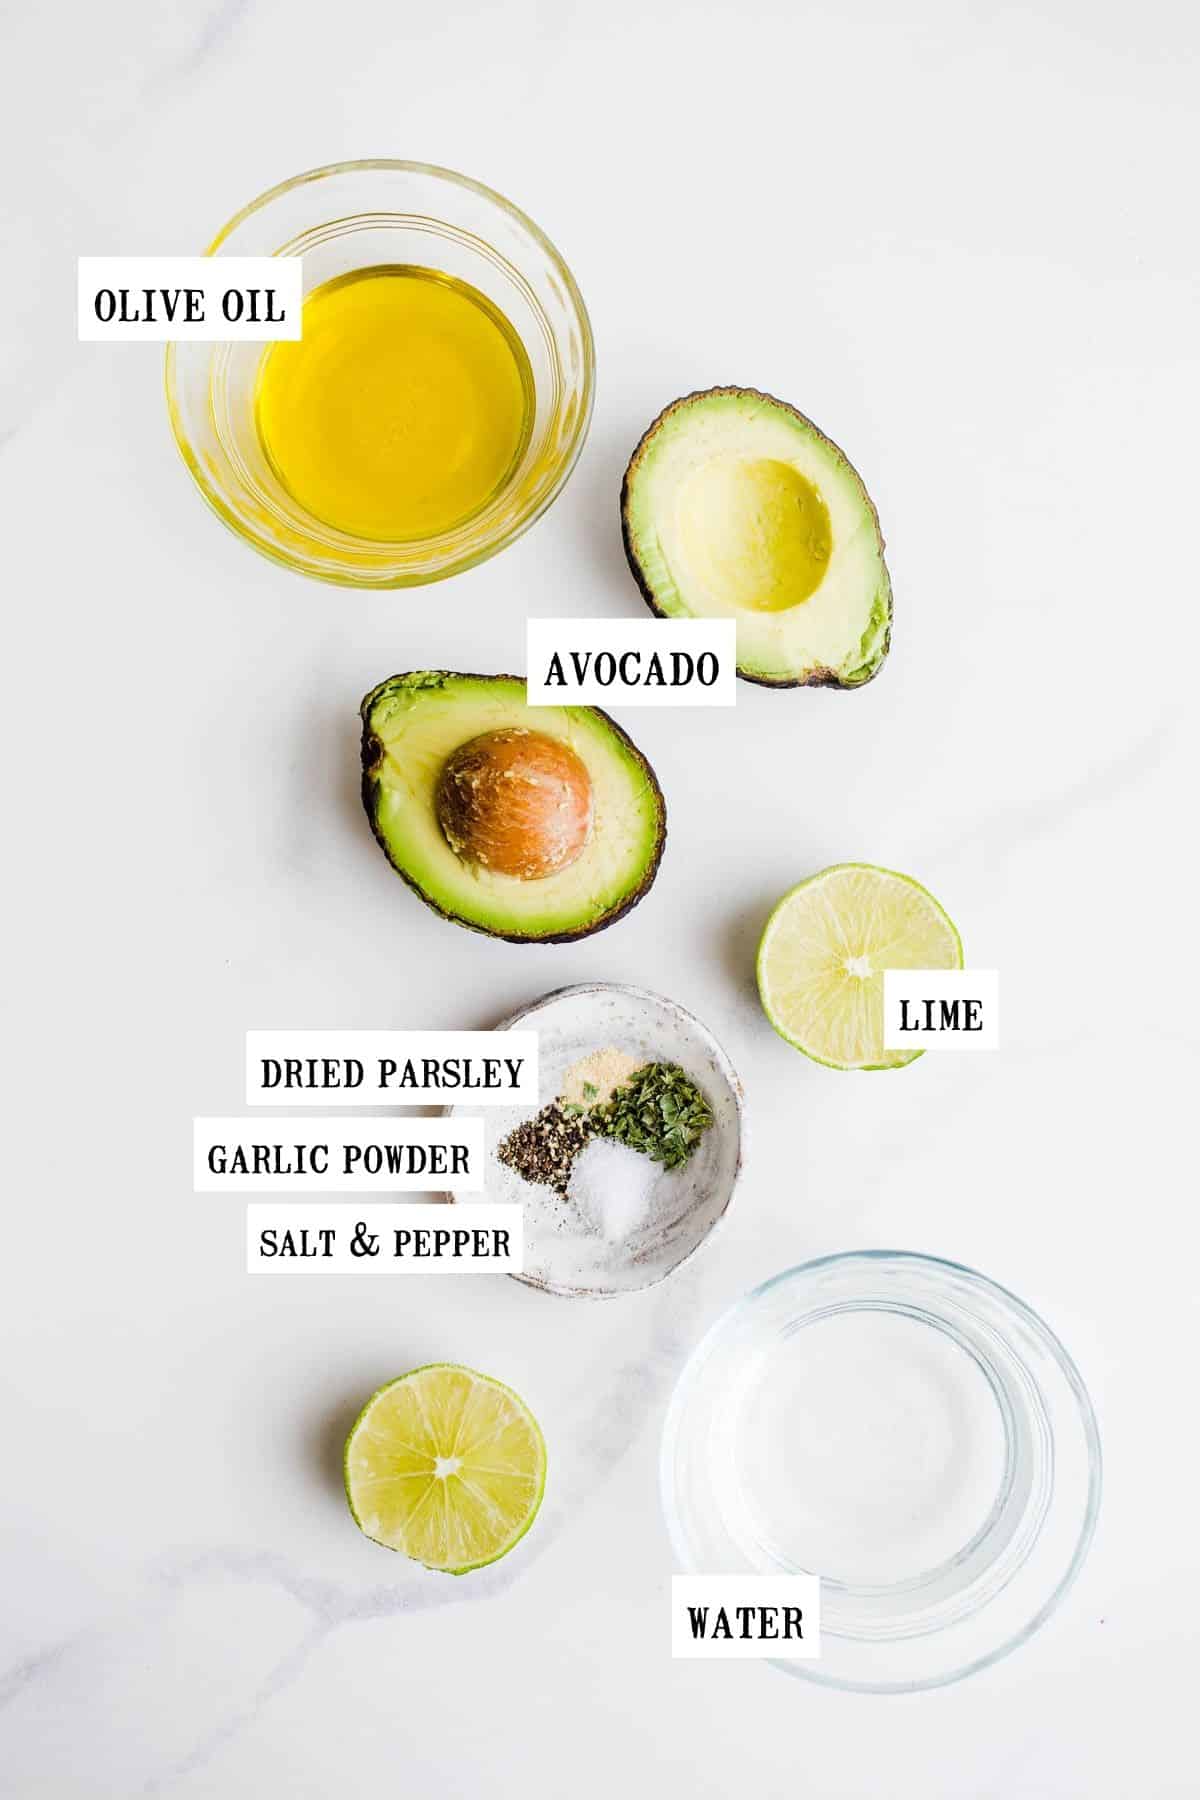 Olive oil, two avocado halves, limes, dried spices, and water laid out on a marble surface.